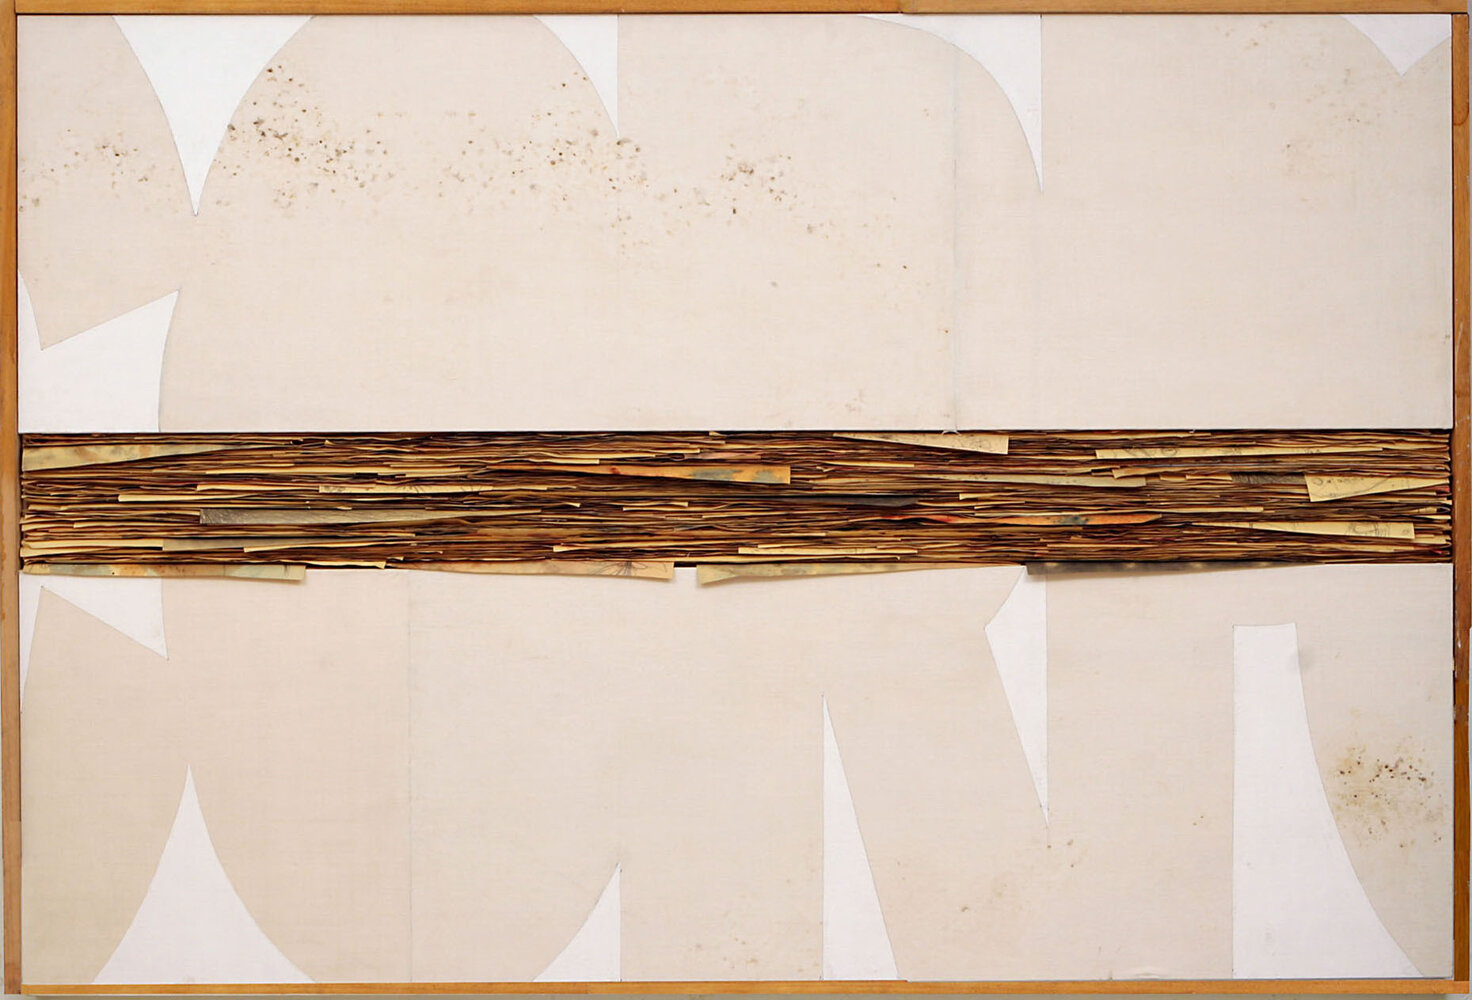 Untitled, 2011, mixed media on paper and canvas on wood, 140 x 200 cm